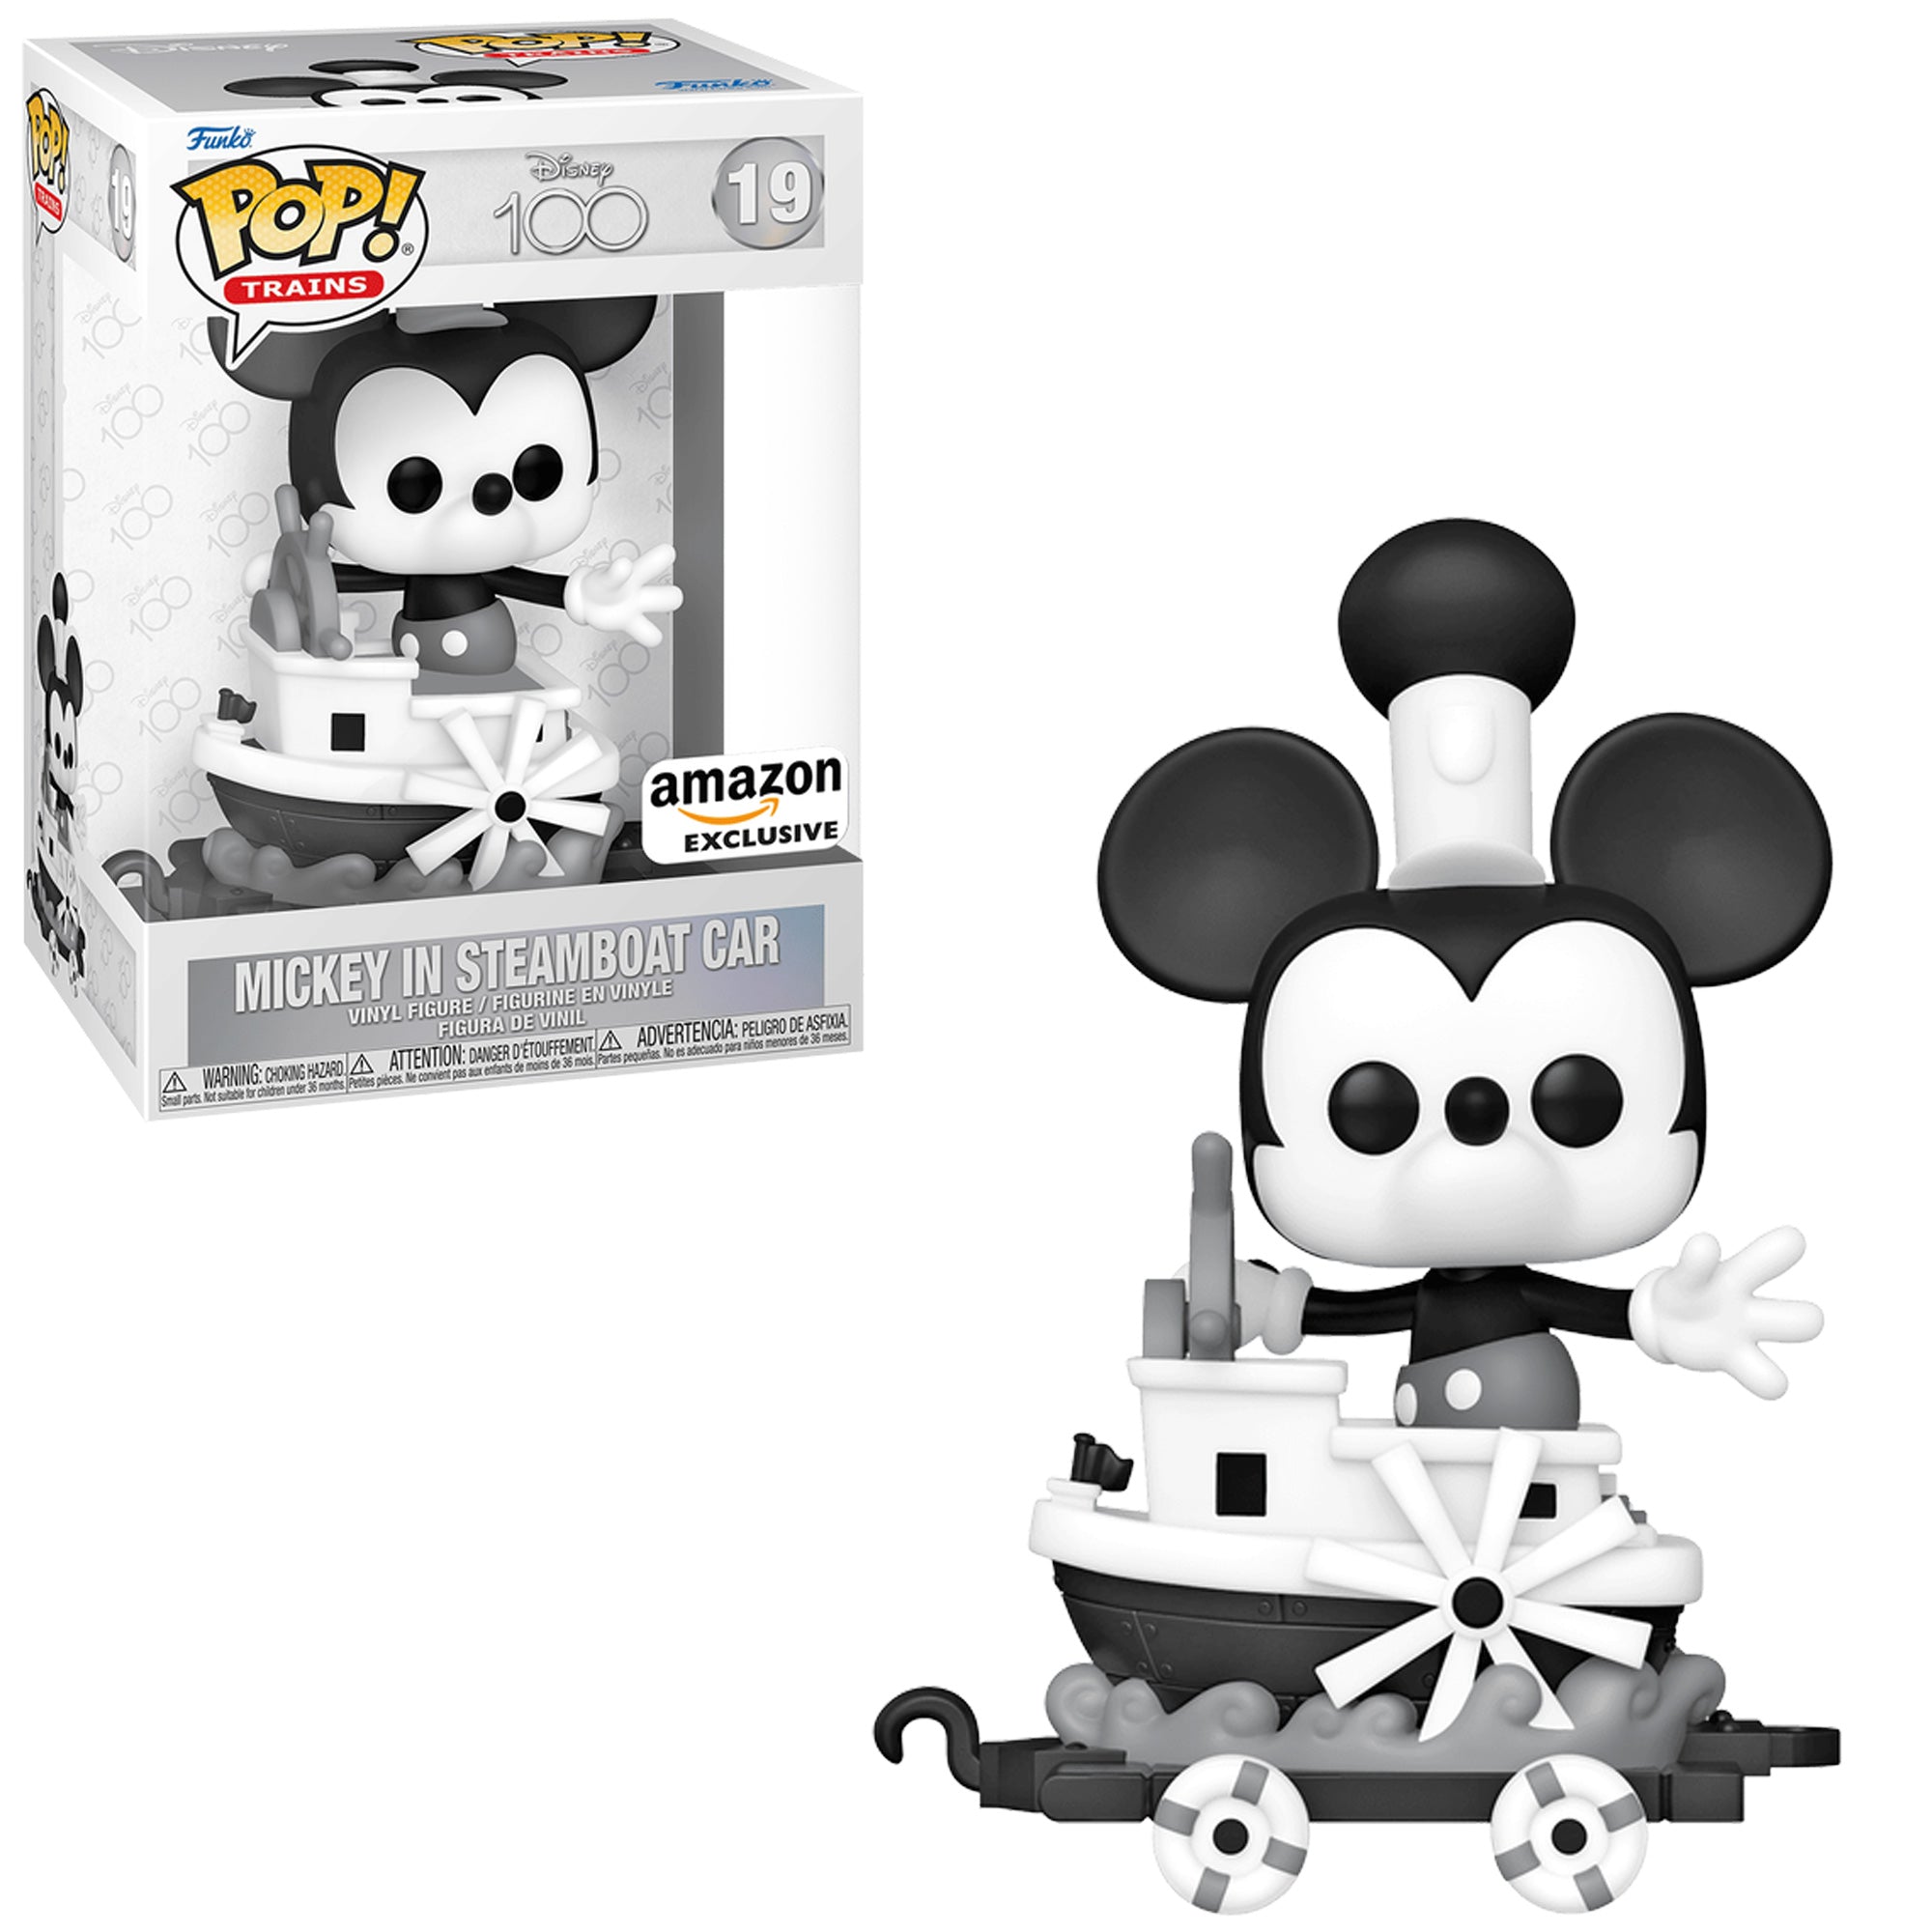 Funko Pop! Train: Disney 100 - Mickey in Steamboat Car, Mickey Mouse,   Exclusive